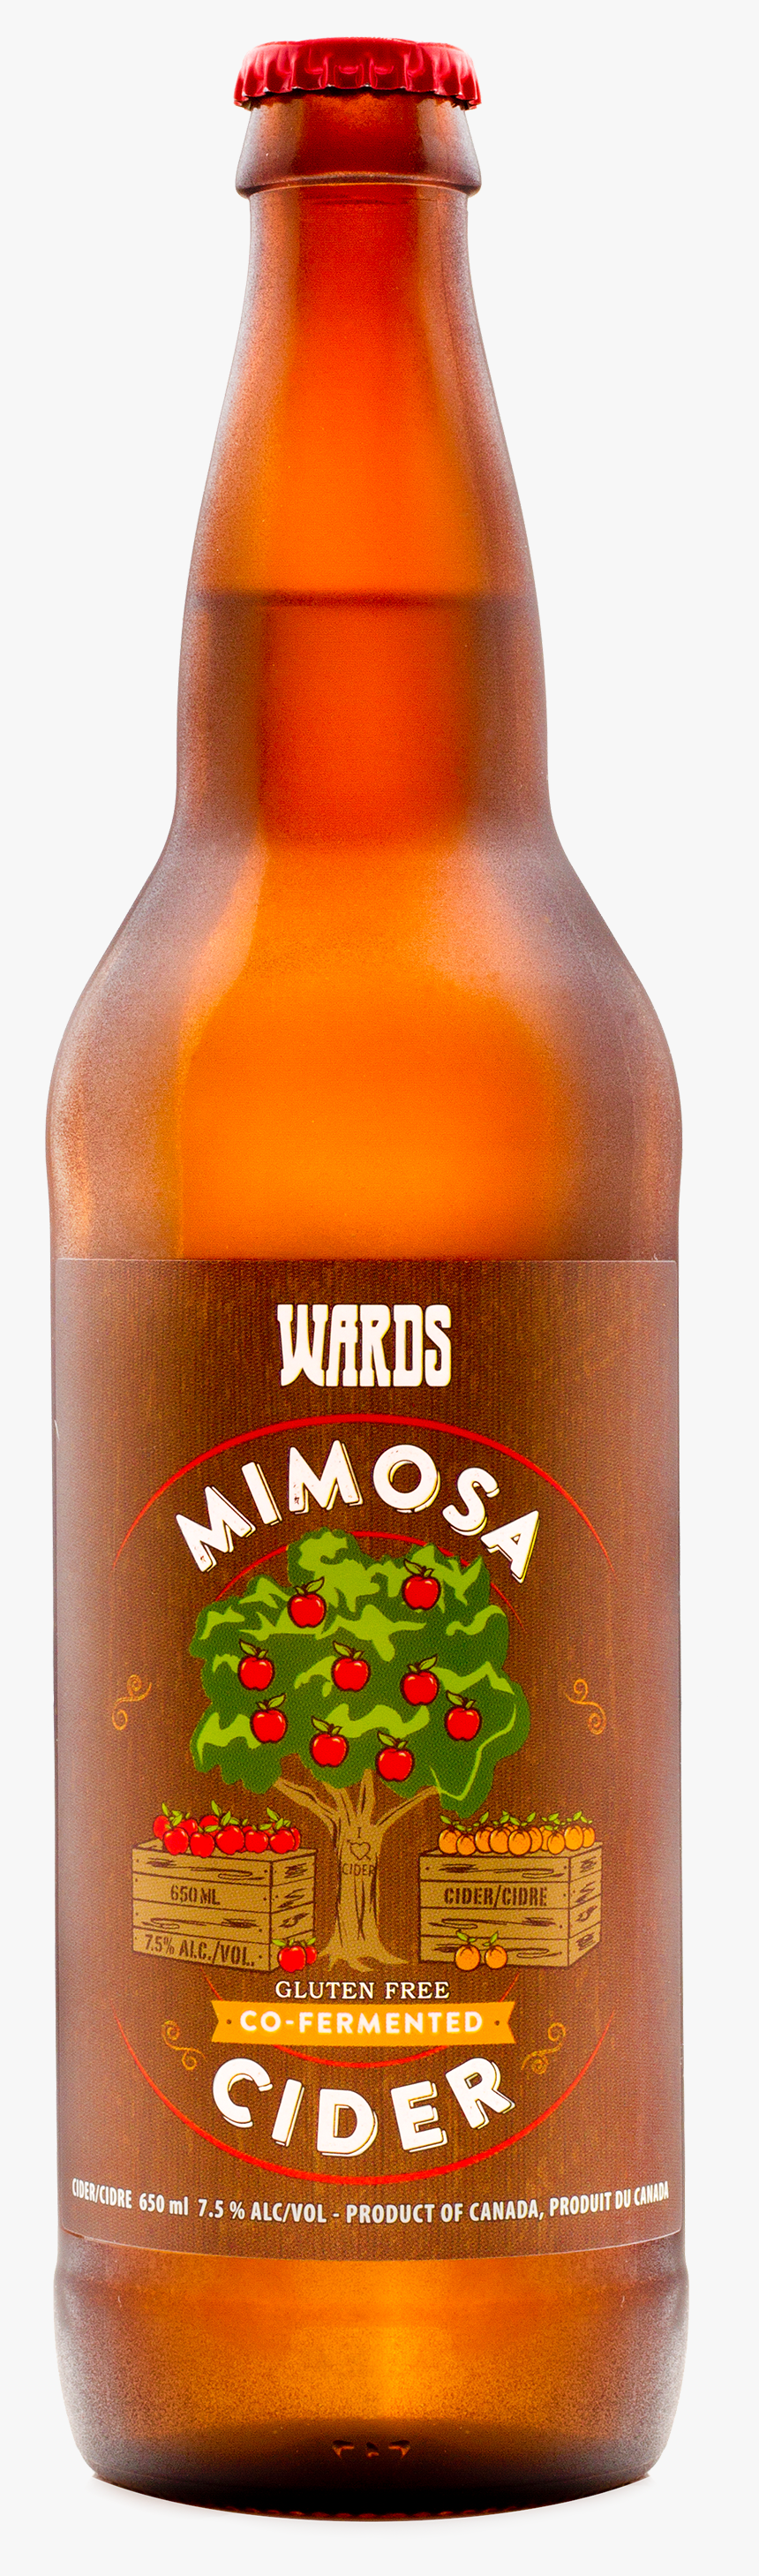 Wards Mimosa - Beer Bottle, HD Png Download, Free Download